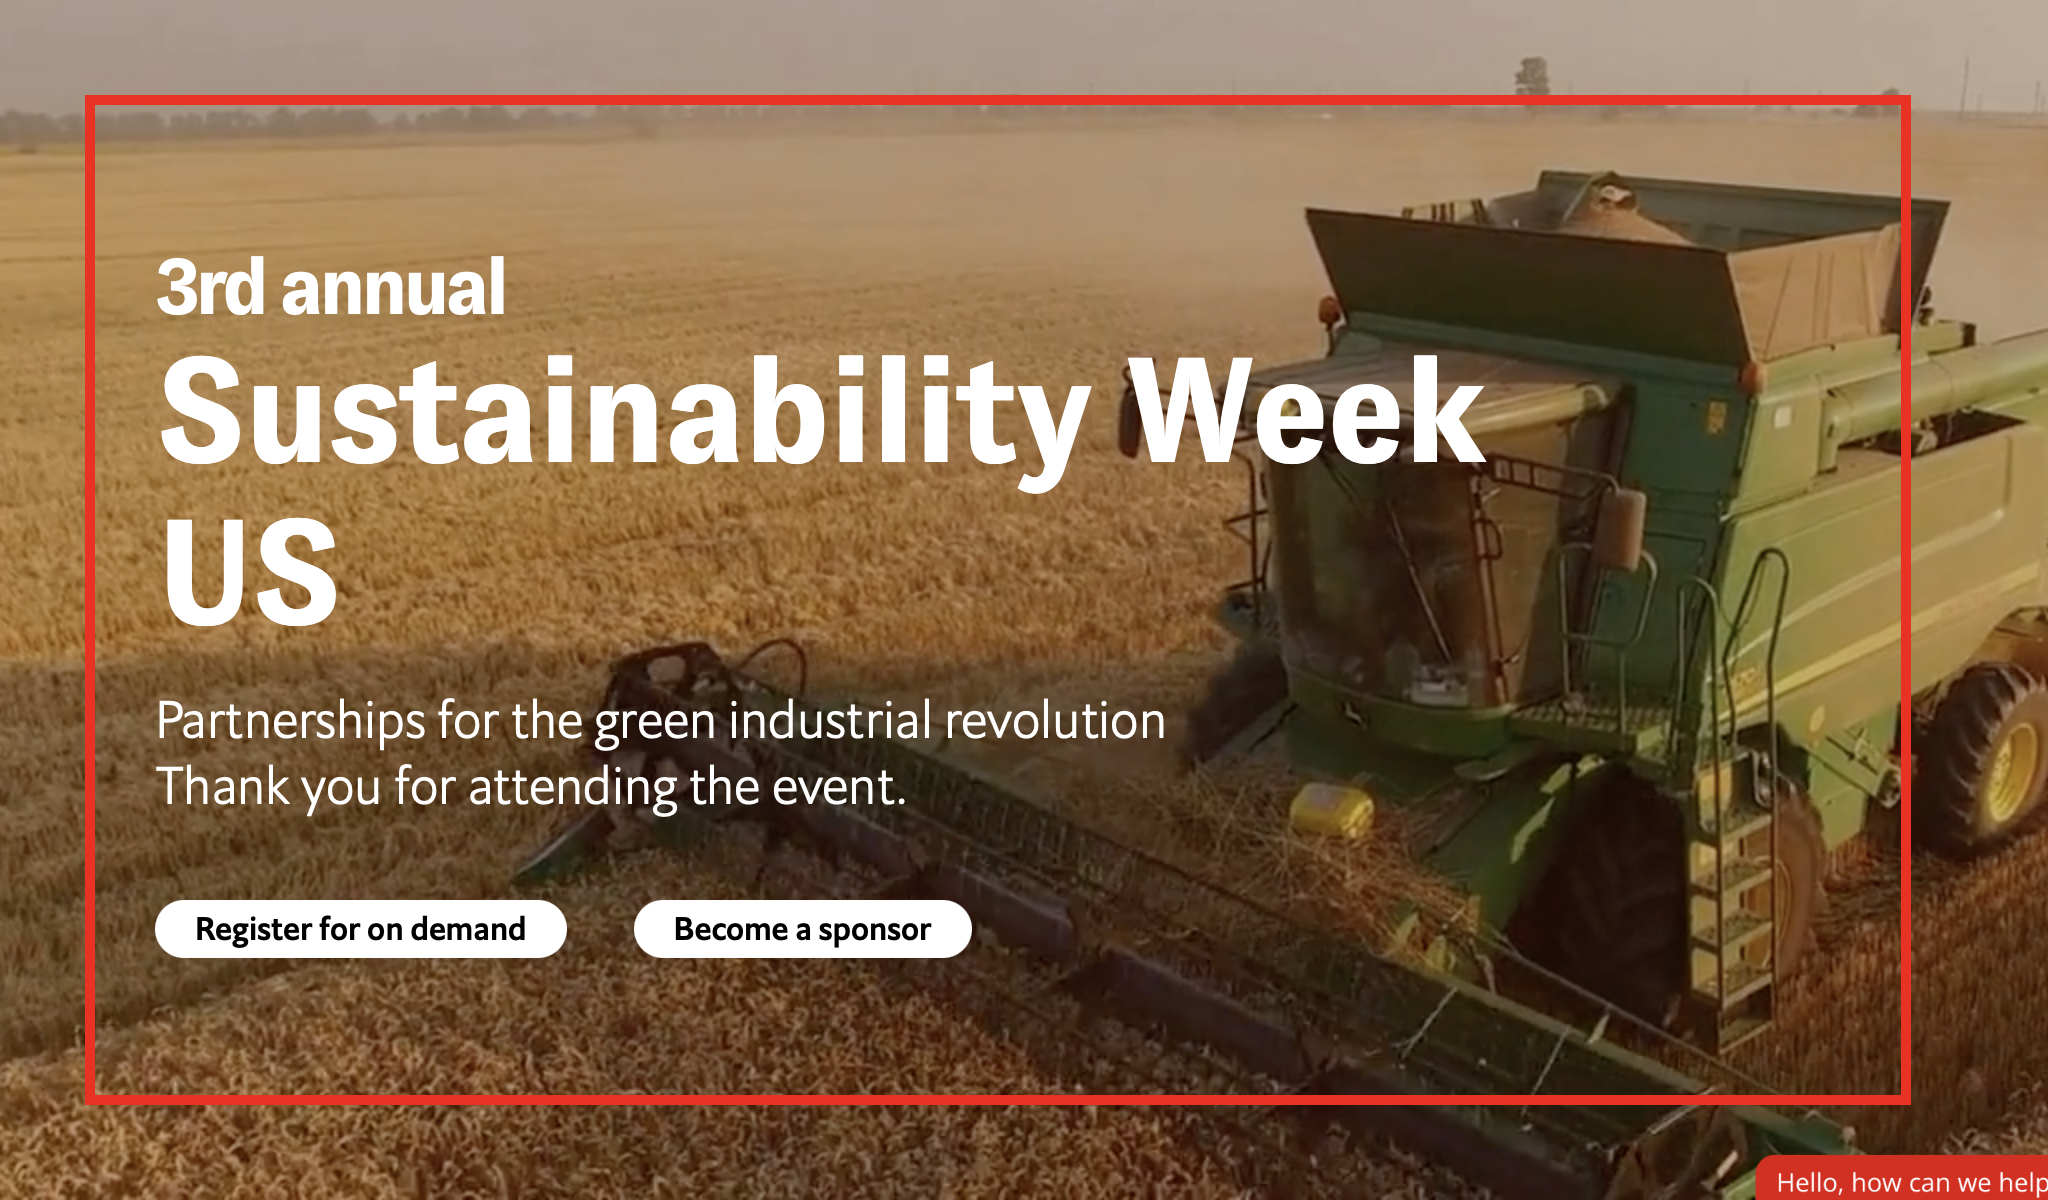 Promotional image for OWL ESG's 3rd Annual Sustainability Week, featuring the company logo and text detailing the event, emphasizing their ongoing commitment to sustainable practices and awareness